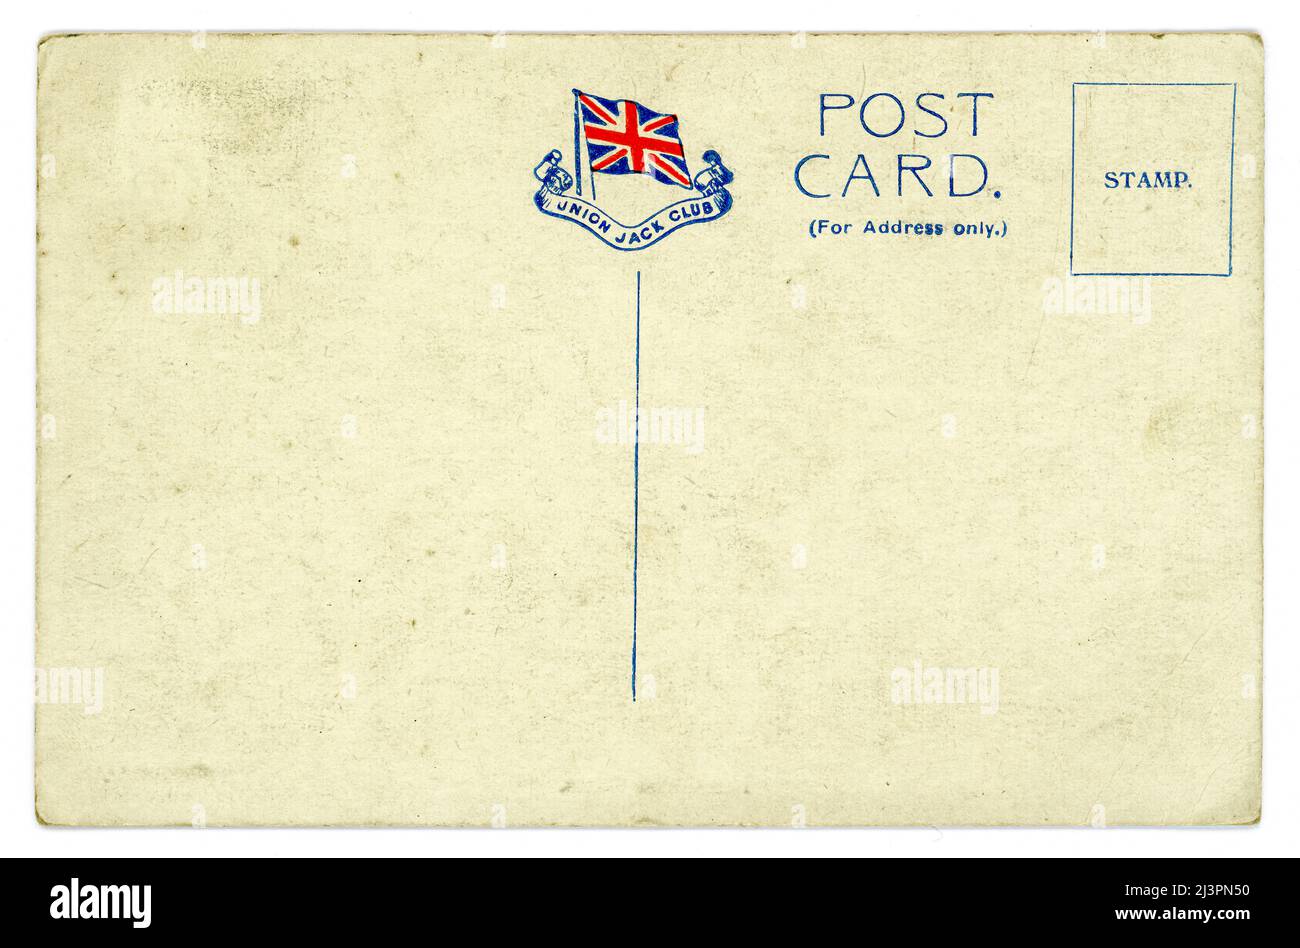 Original WW1 era postcard with the Union Jack Club logo, 91A Waterloo Road, Lambeth, London, U.K. The Union Jack Club was opened in 1907 providing accommodation, a restaurant, meeting and reading rooms for servicemen whilst in London. It saw much use during both world wars. Postcard published by the Union Jack Club. circa 1915. Stock Photo